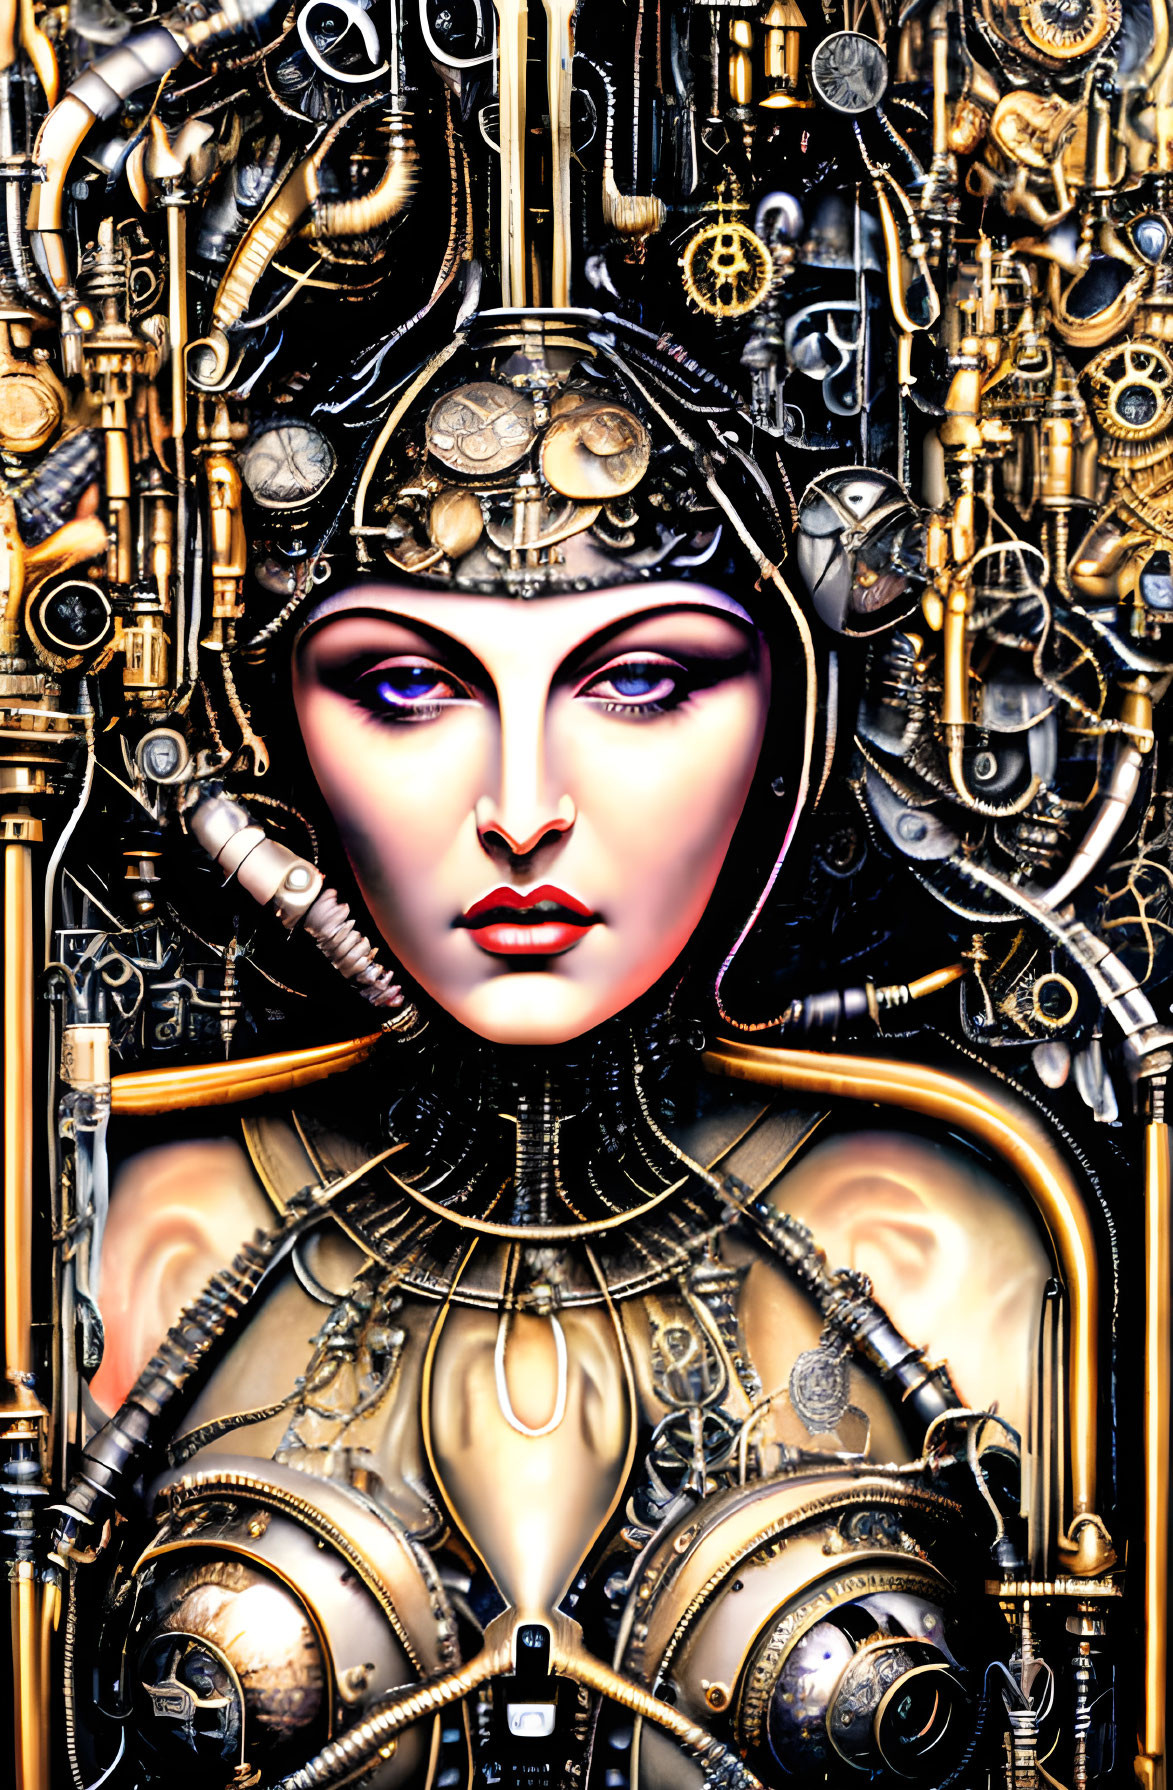 Detailed Steampunk Female Figure Illustration with Mechanical Elements